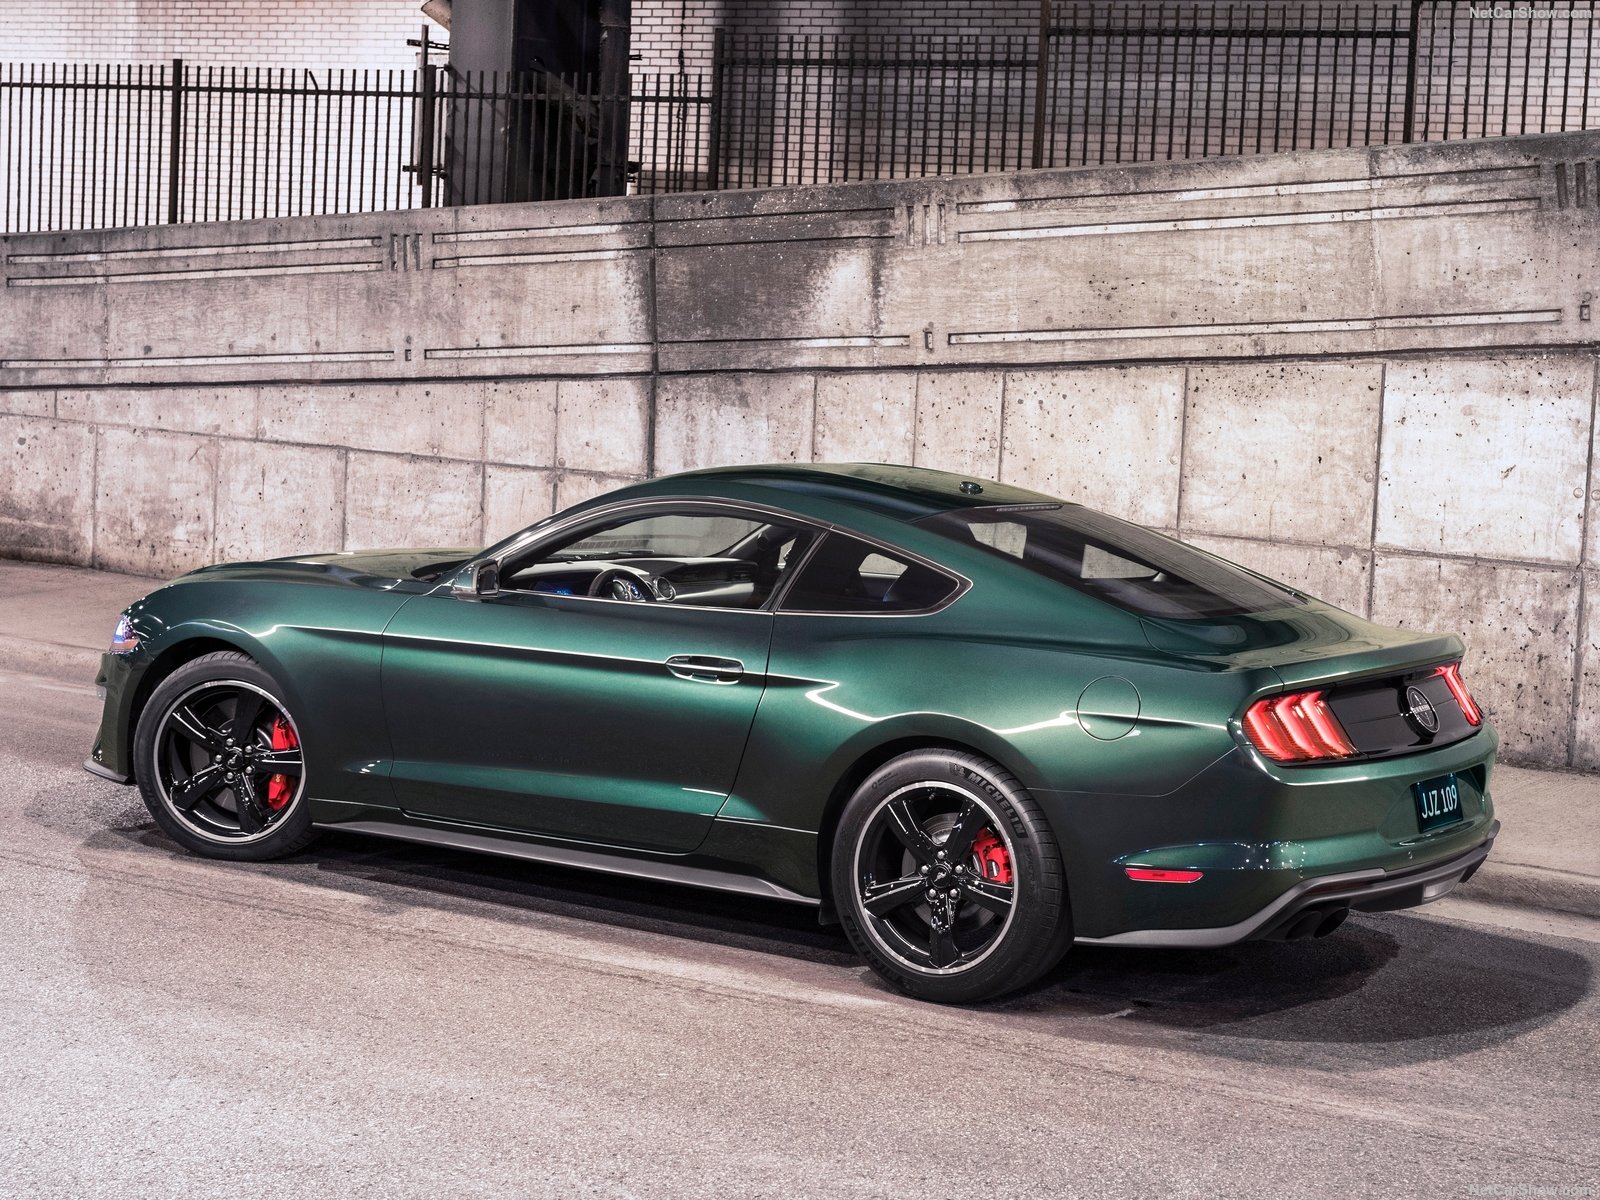 General 1600x1200 Ford Ford Mustang car green cars Ford Mustang S550 muscle cars American cars